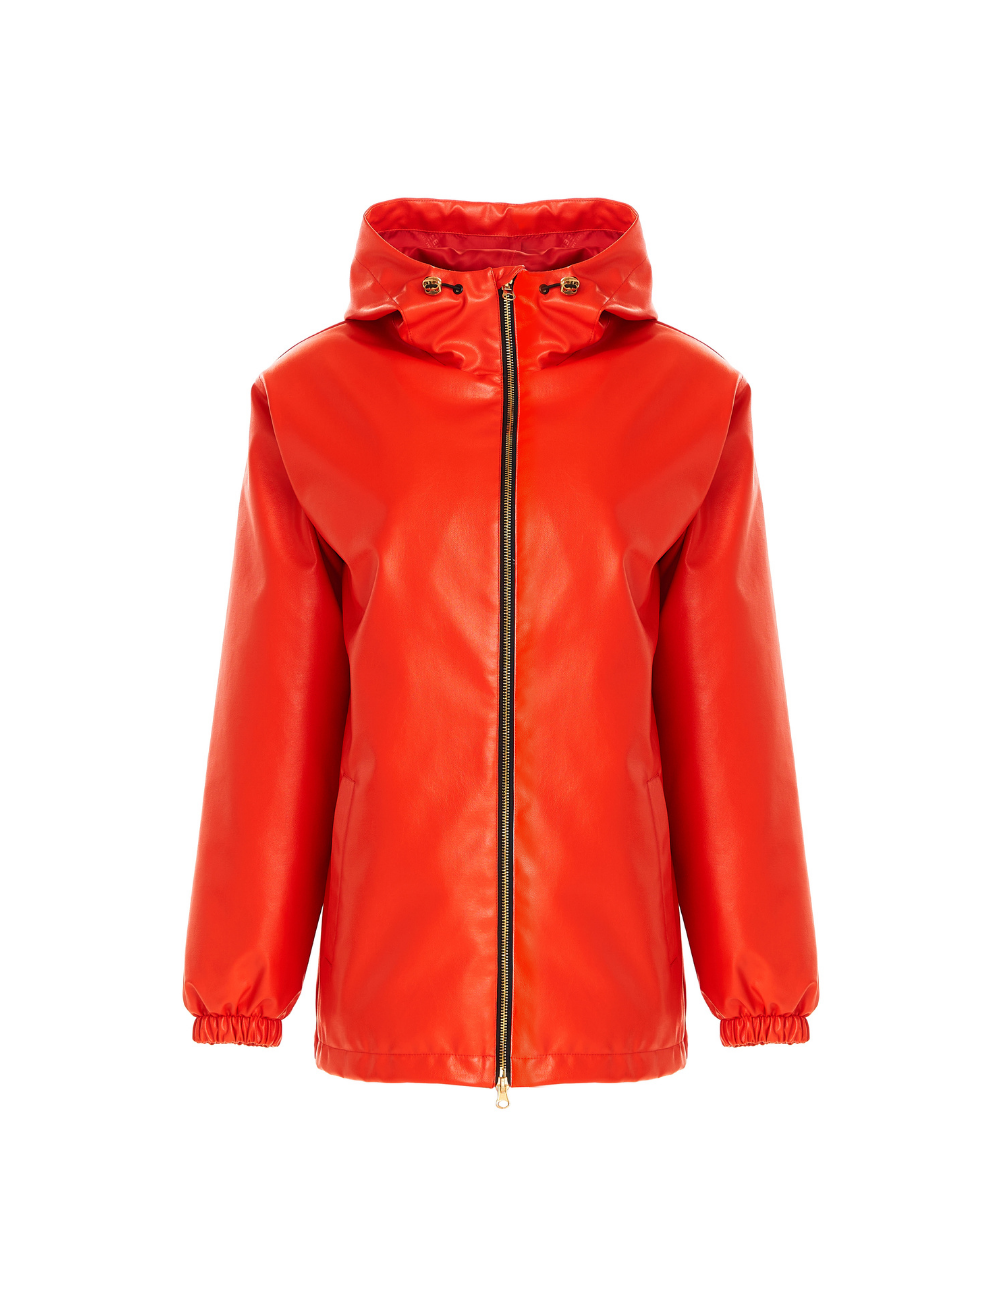 Hunter Red Tart Sustainable Outerwear Made in Canada Vegan Leather